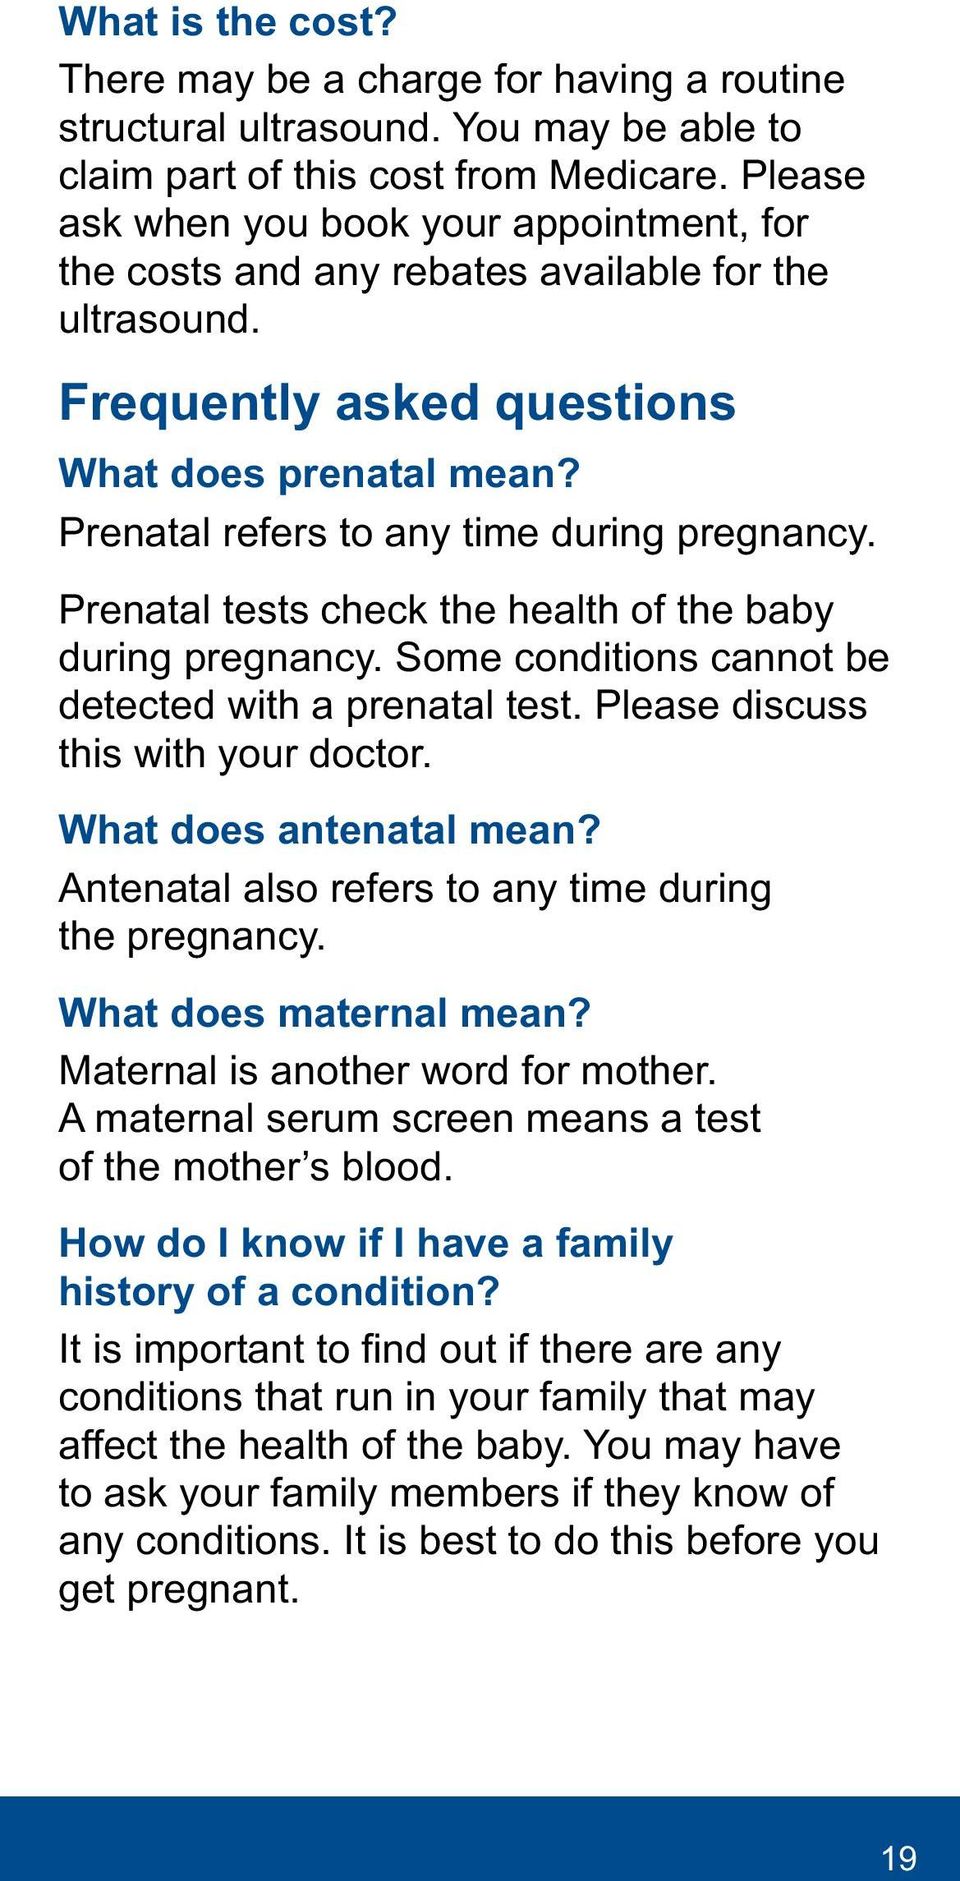 Prenatal tests check the health of the baby during pregnancy. Some conditions cannot be detected with a prenatal test. Please discuss this with your doctor. What does antenatal mean?